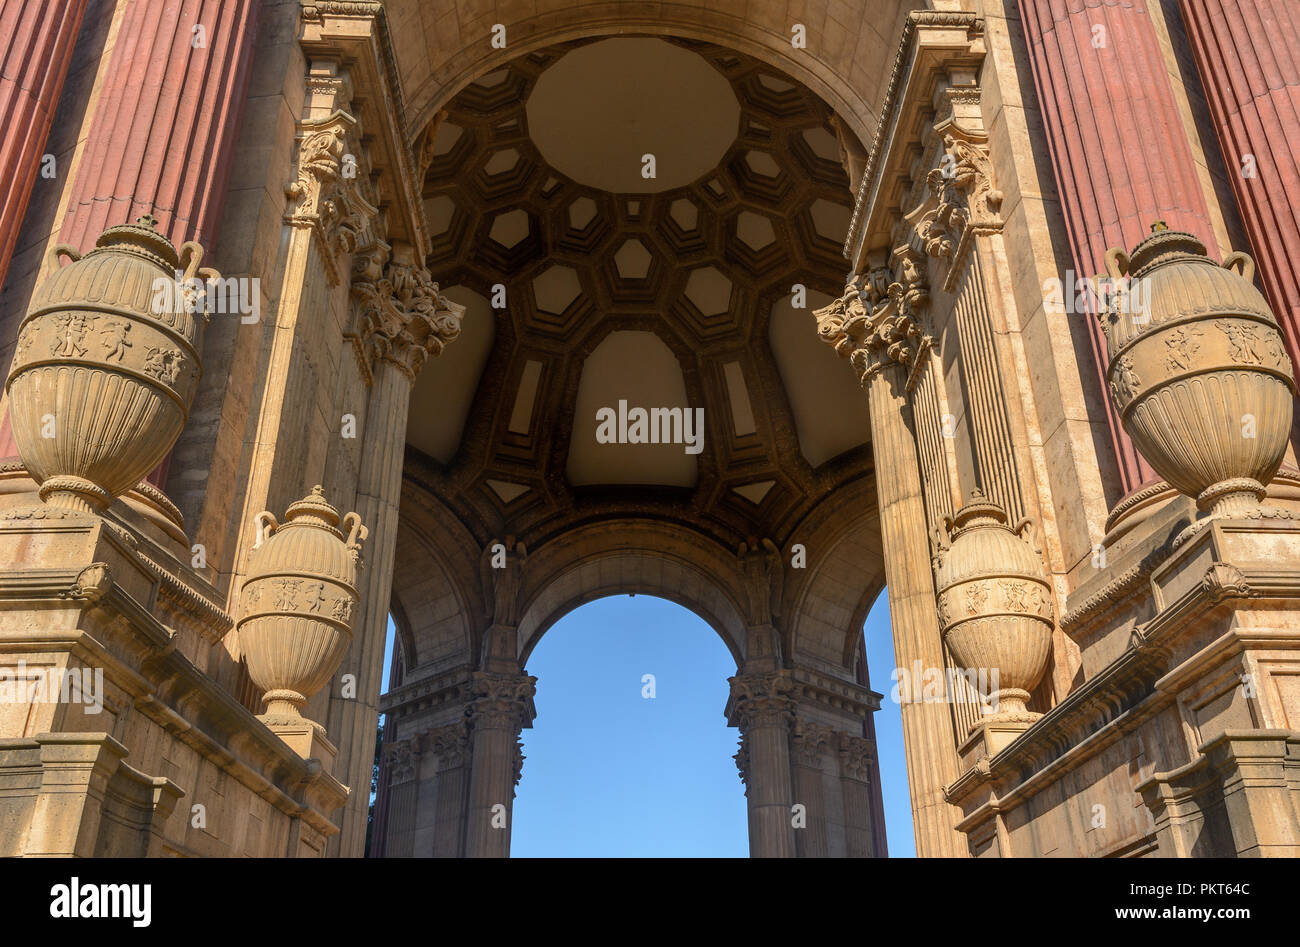 The Exterior And Interior Detail Of The Large White Dome Of The Palace Of Fine Arts Theatre In San Francisco Stock Photo